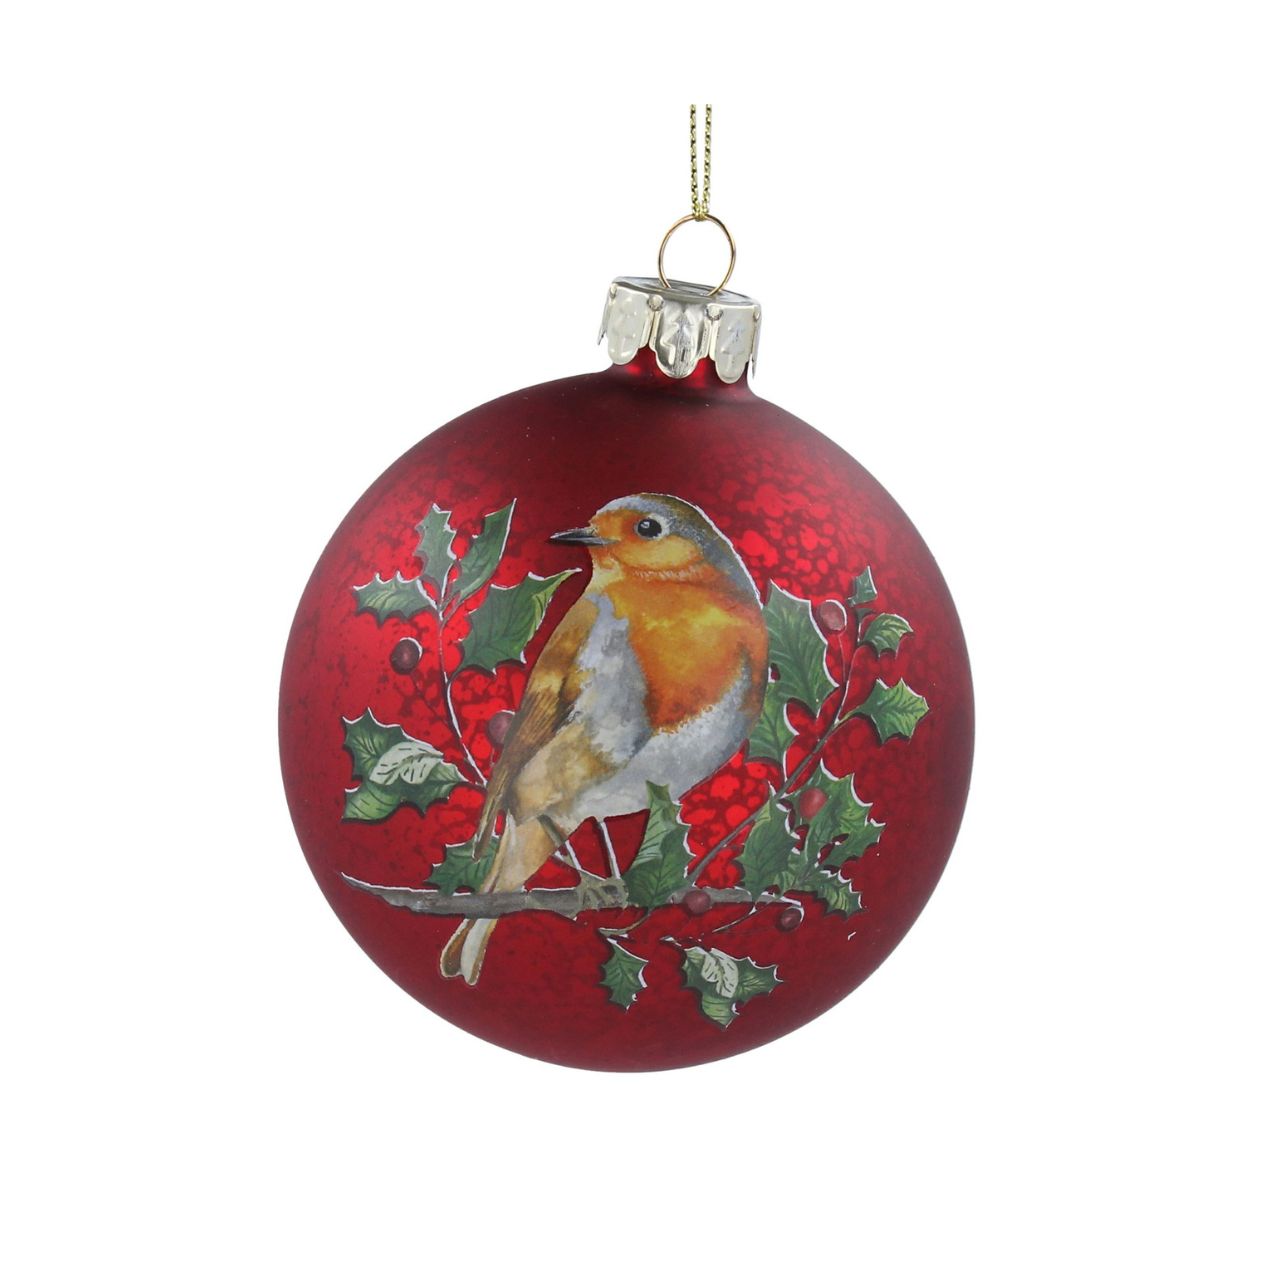 Gisela Graham Christmas Baubles - Antique Red with Robin  This Gisela Graham Christmas Baubles is perfect for your festive holiday décor. Featuring an Antique Red glaze and a beautiful painted Robin design, these classic decorations will bring a subtle elegance to your tree this season.